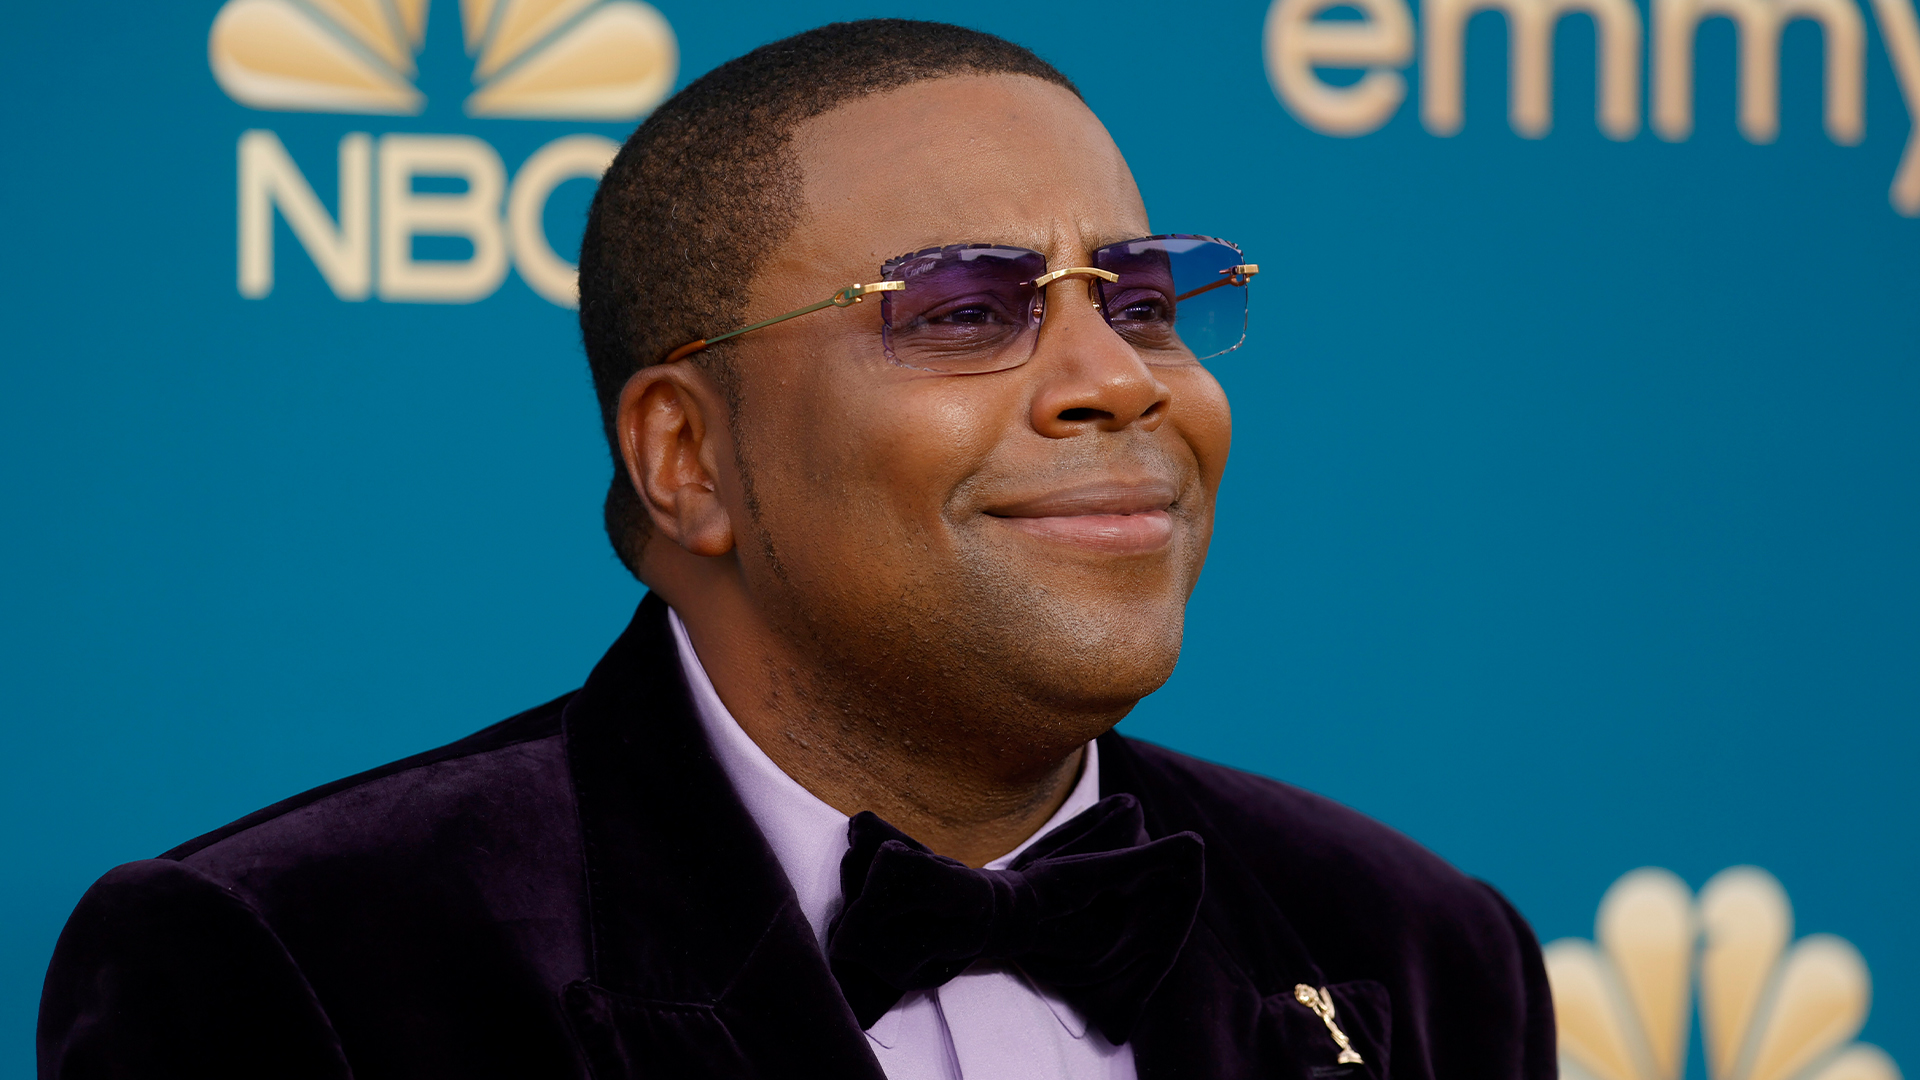 Kenan Thompson Recalls Losing $1.5M While On Nickelodeon Due To A 'Dirty' Accountant — 'I'll Take Those Life Lessons And Just Learn From 'Em'